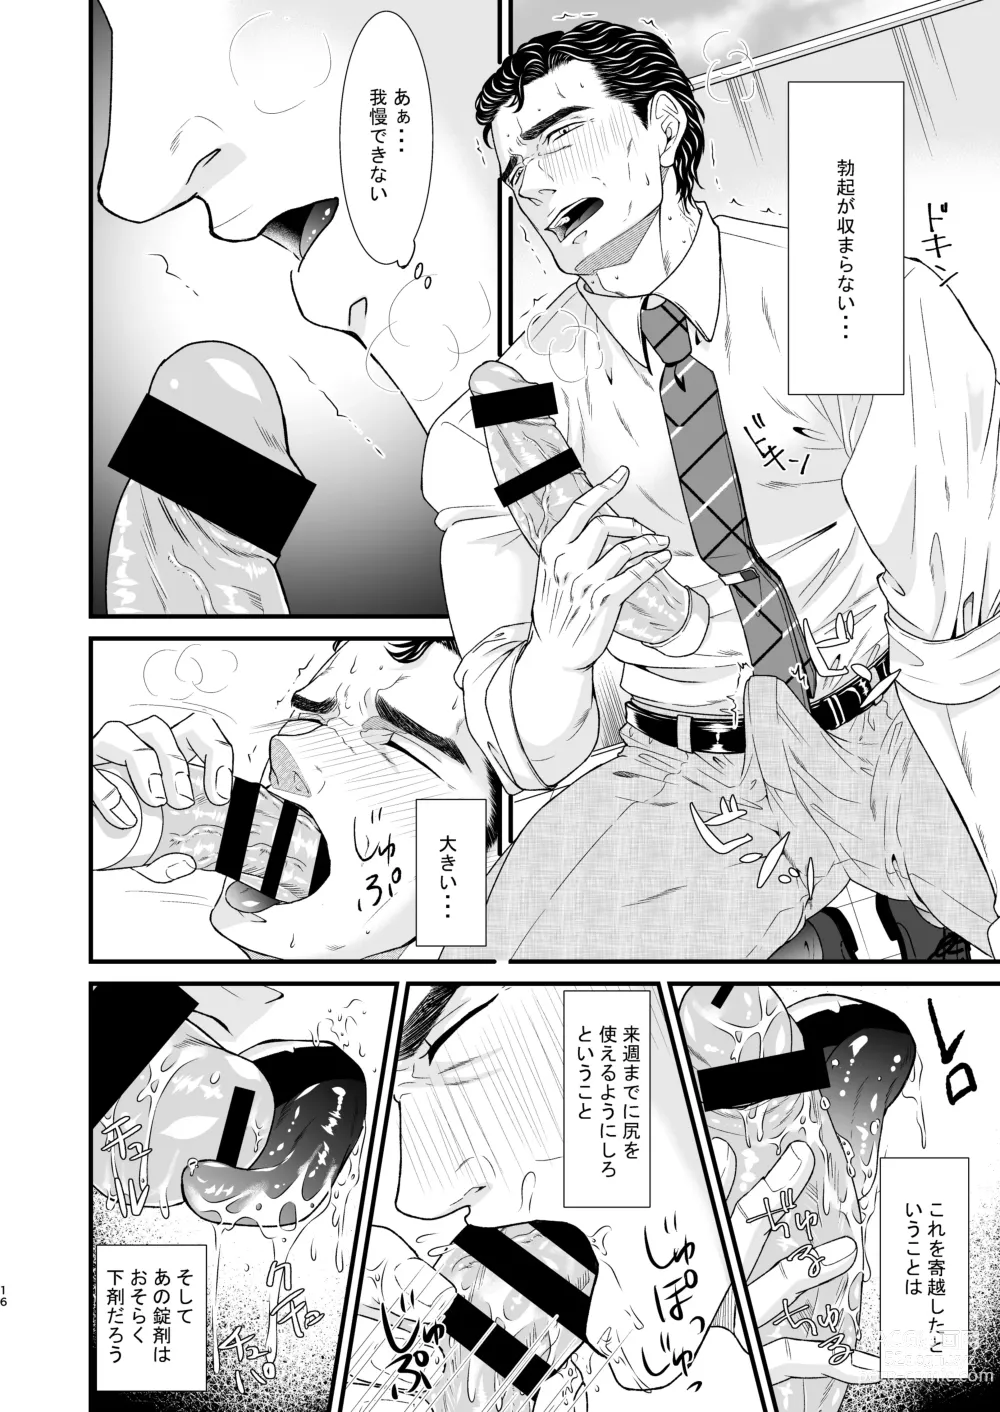 Page 15 of doujinshi Confusion